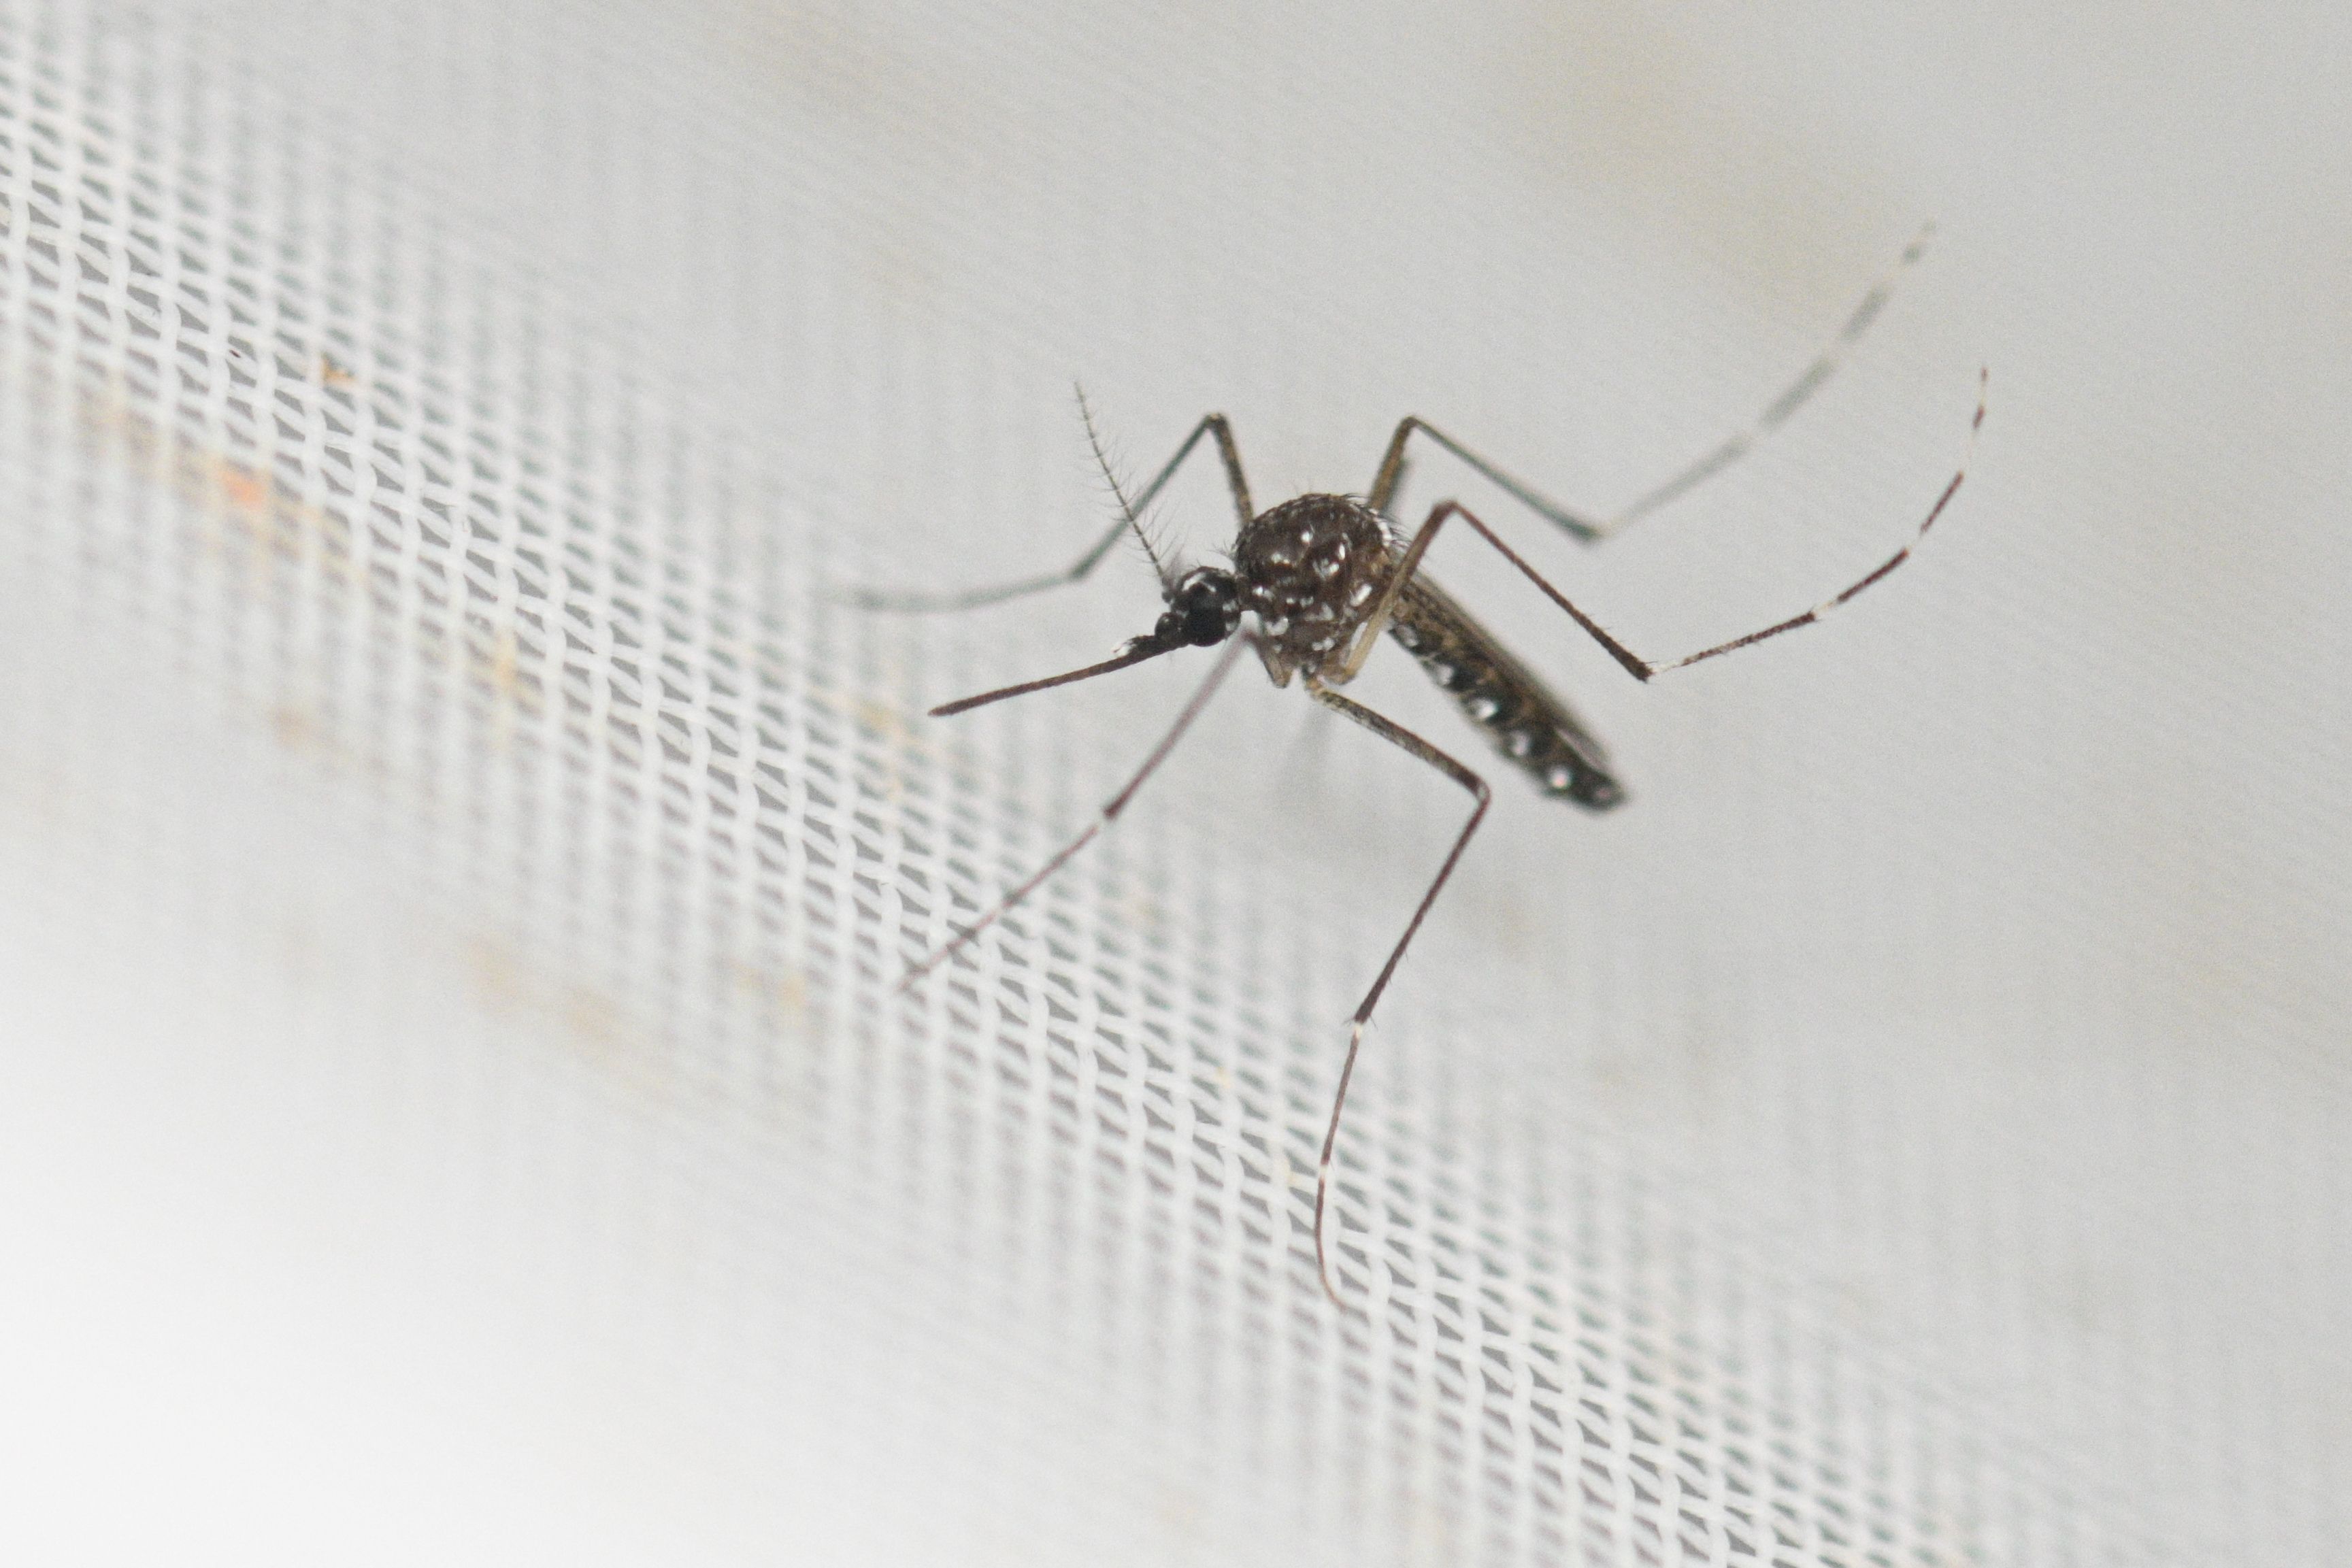 An Aedes aegypti mosquito is pictured at a laboratory of the Center for Parasitological and Vector Studies (CEPAVE) of the national scientific research institute CONICET, in La Plata, Buenos Aires Province, Argentina, on March 26, 2024. Researchers at CONICET are studying the biology, genetic characteristics and behaviour of the Aedes aegypti mosquitoes, transmitter of dengue, zika and chikungunya, and creating biological control strategies as Argentina is facing a significant growing number of dengue cases. (Photo by Luis ROBAYO / AFP)